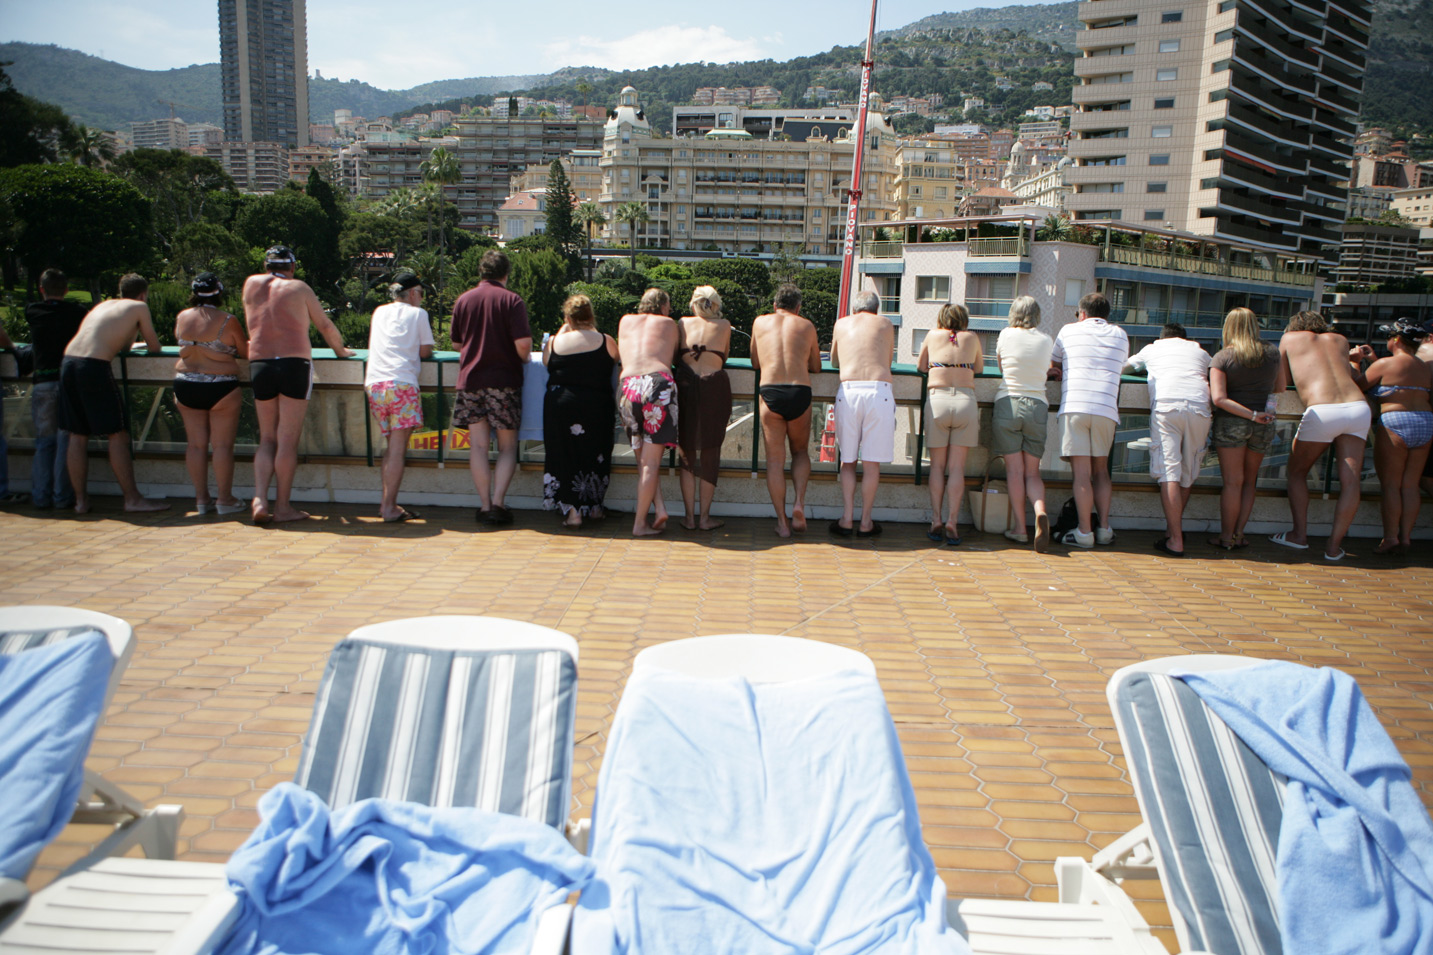 Sun worshipers take a break from tanning to watch the race, at the Monaco Grand Prix